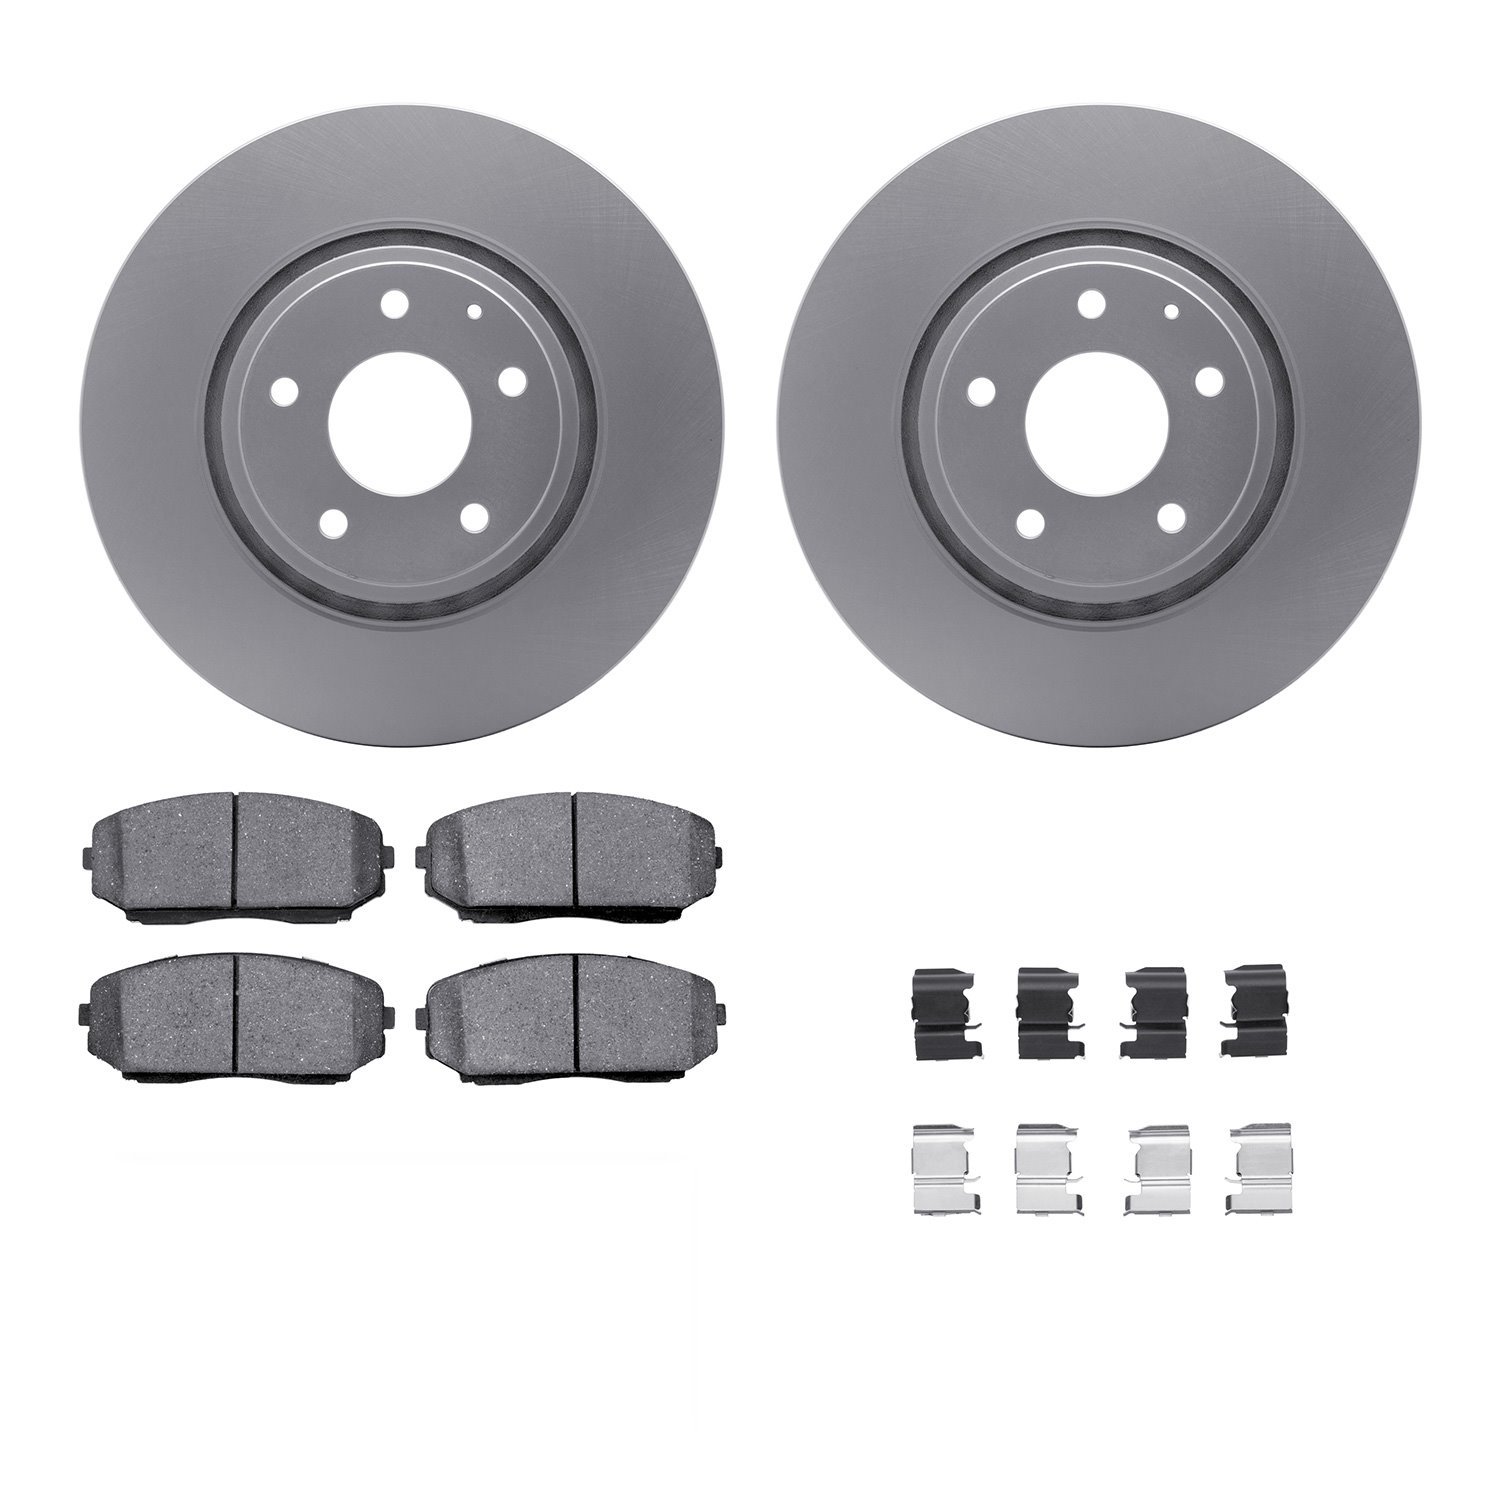 4312-80027 Geospec Brake Rotors with 3000-Series Ceramic Brake Pads & Hardware, Fits Select Ford/Lincoln/Mercury/Mazda, Position